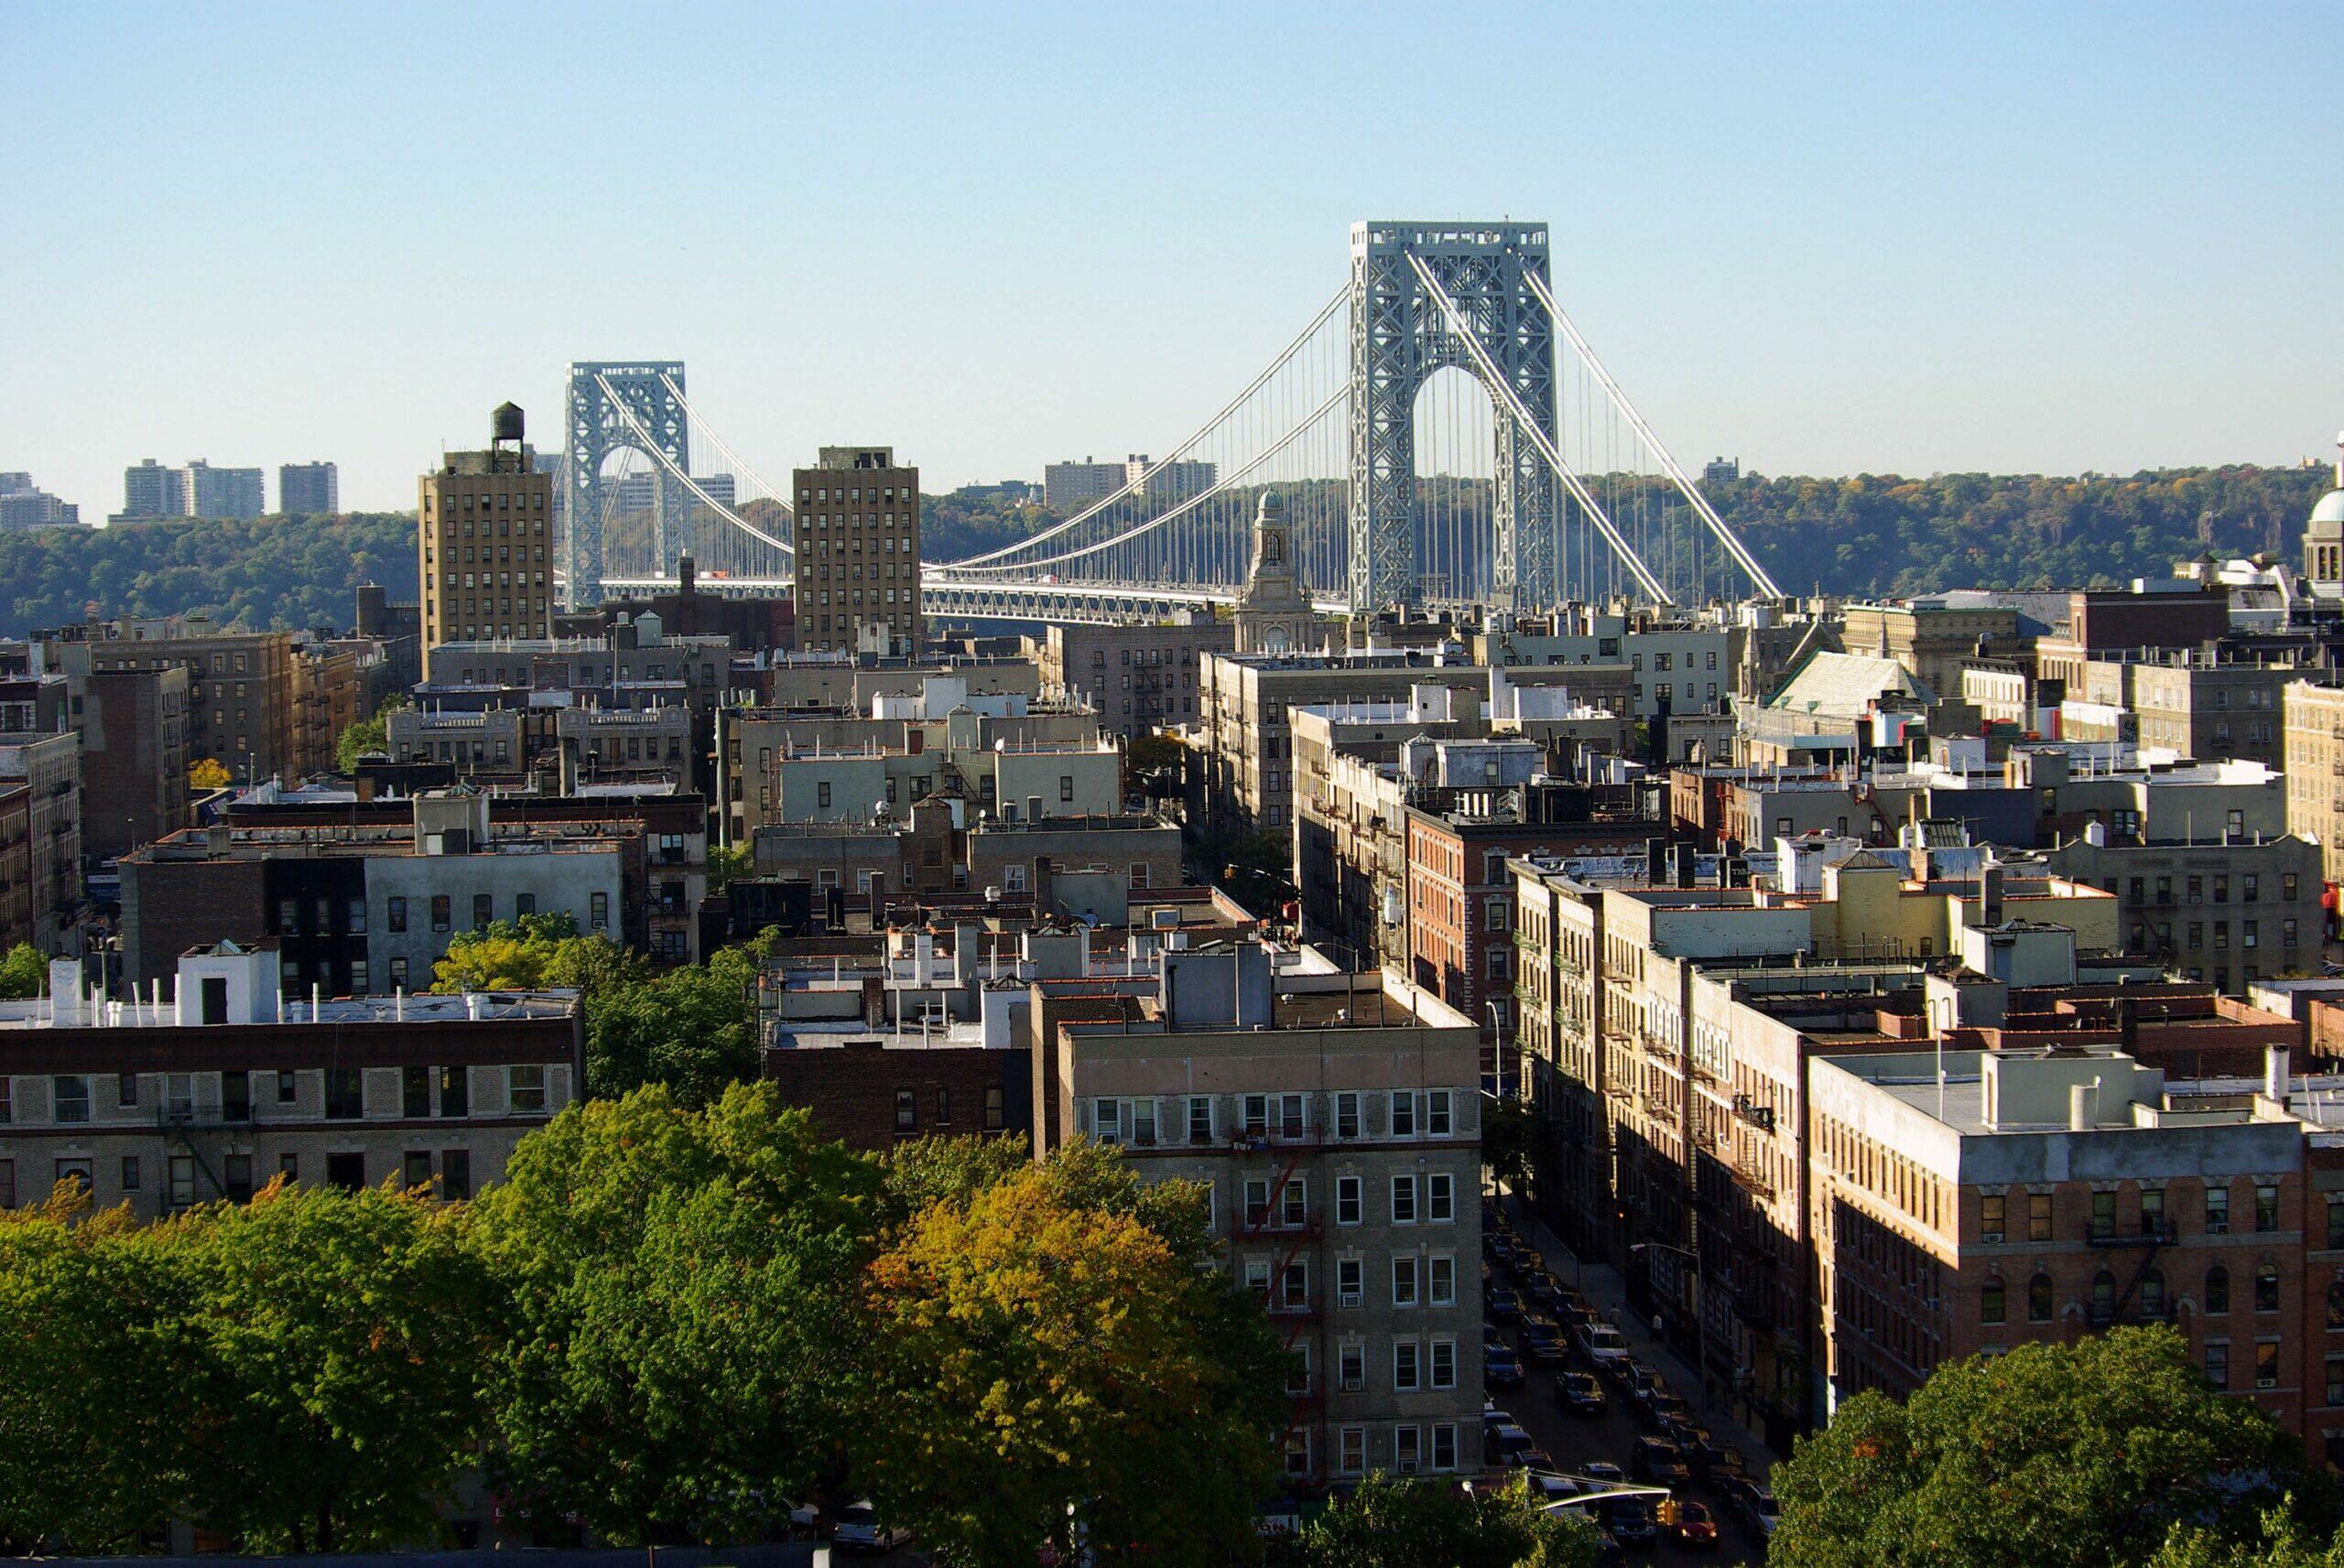 An aerial view of Washington Heights of New York City with the Brooklyn Bridge in the background.